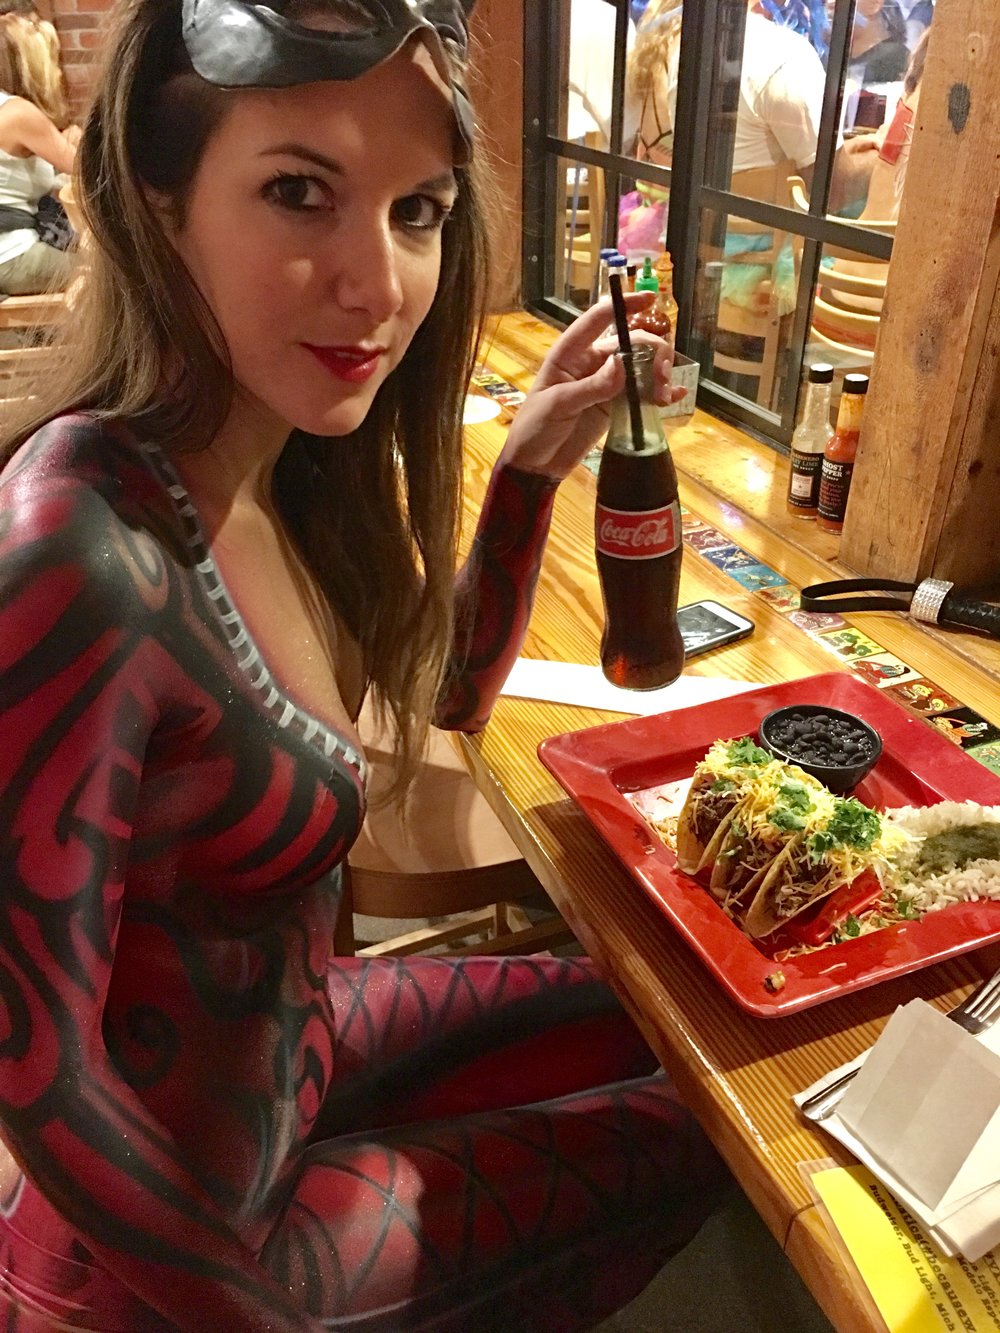  Alessandra Torre - Late dinner at Amigos Tortilla - the best tacos in Key West! And they didn't even blink at my body paint...&nbsp; 